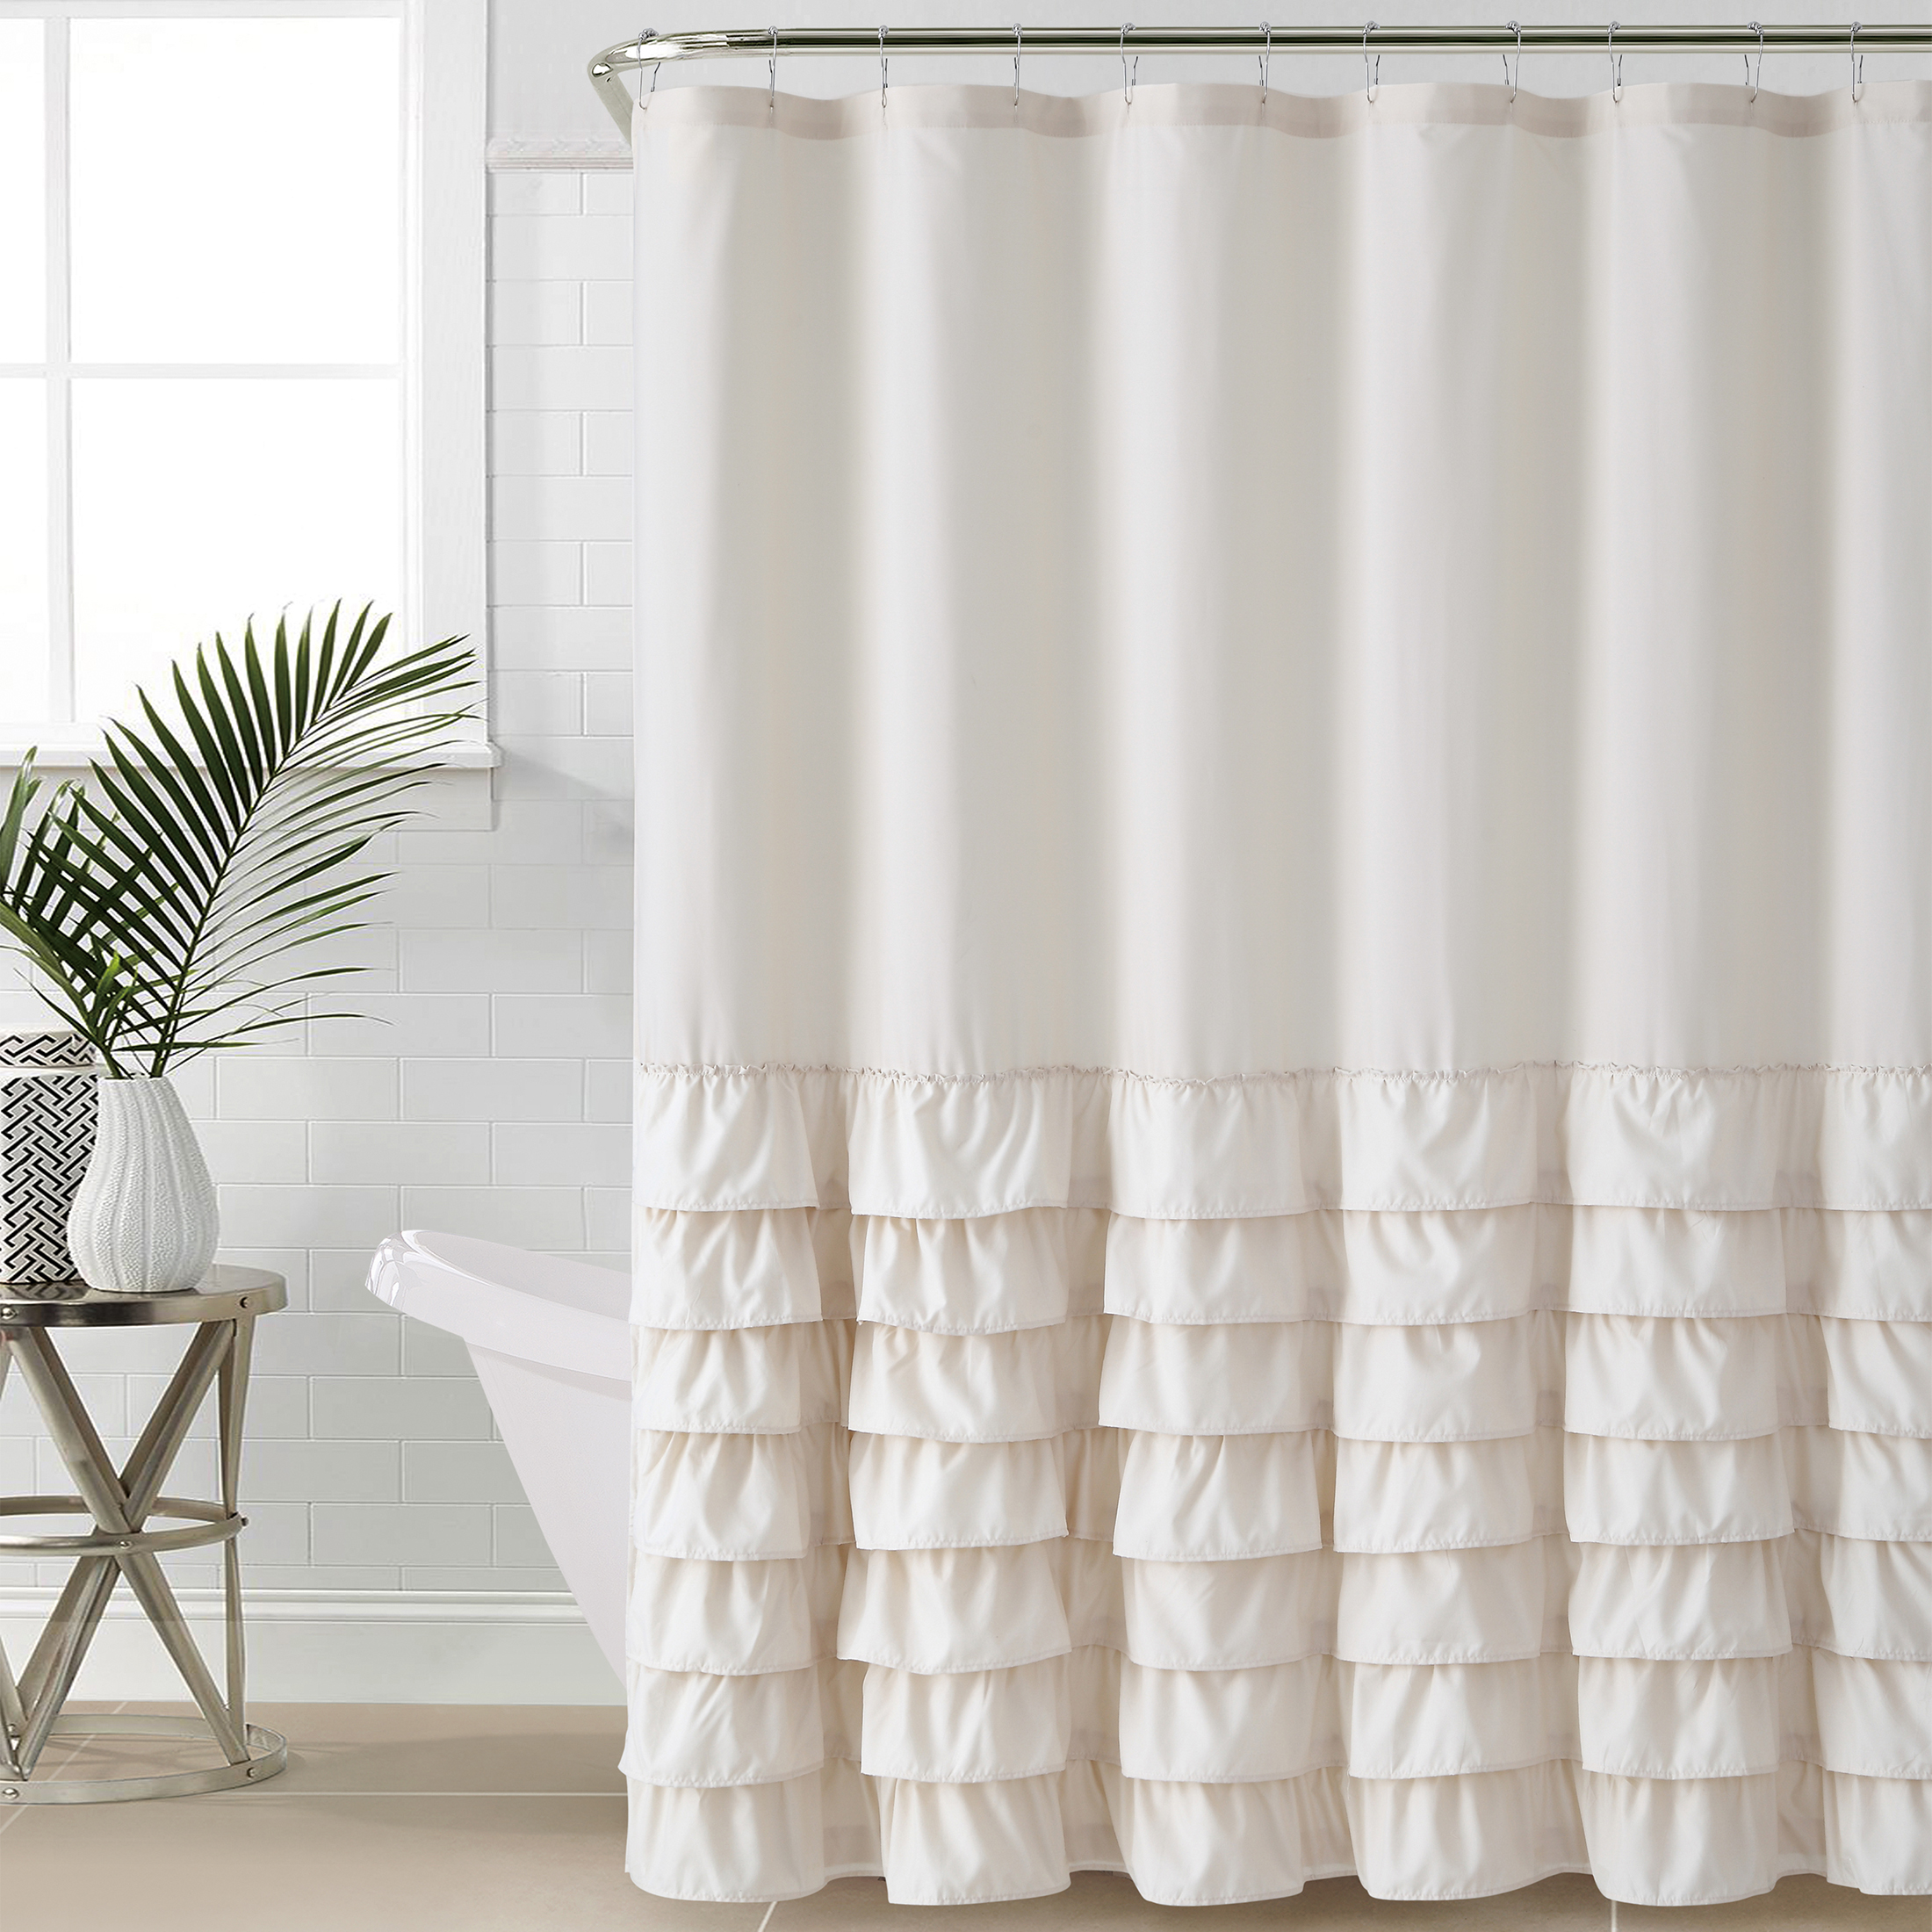 VCNY Home Melanie Taupe Solid Ruffle Polyester Shower Curtain, 72" x 72" - image 1 of 5